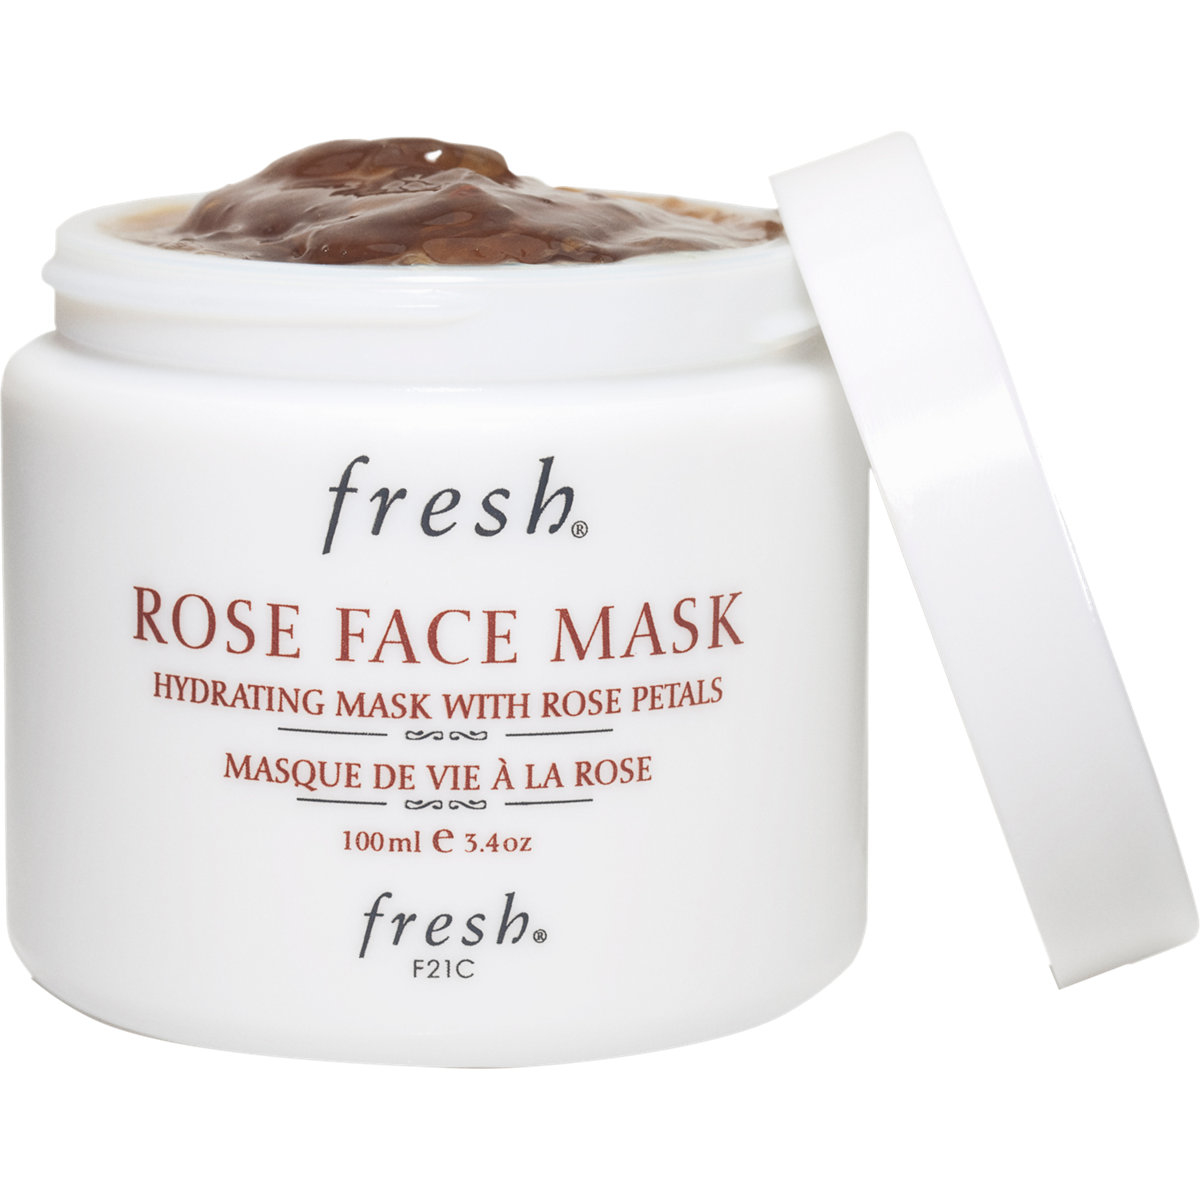 download the new version Mask of the Rose